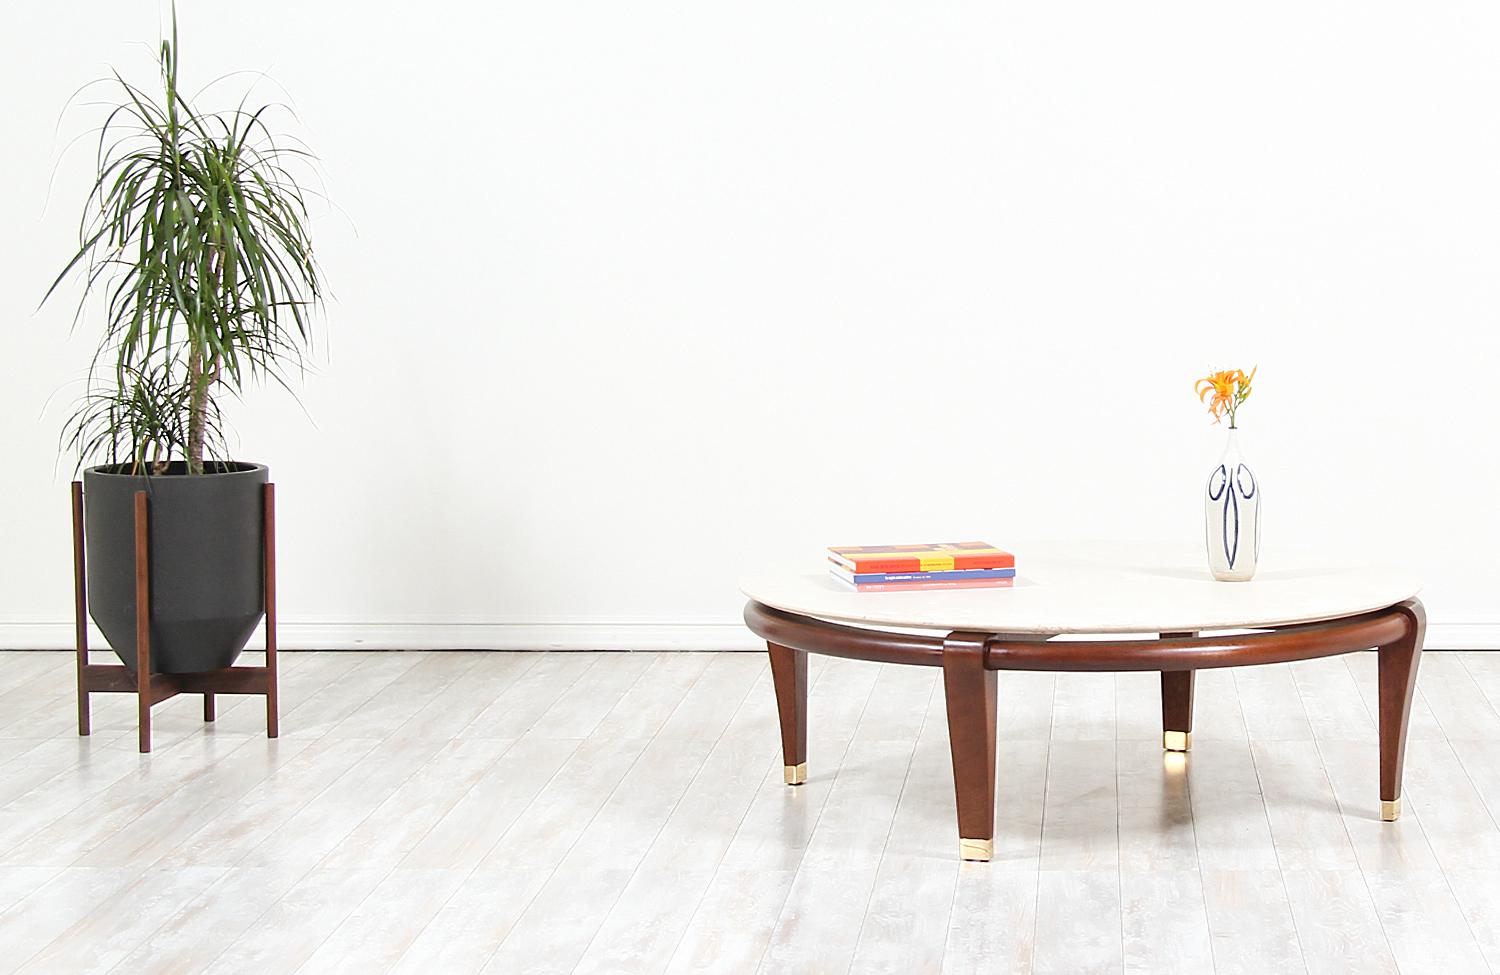 Beautiful model 145 modern coffee table designed by Paul Laszlo for Brown Saltman in the United States, circa 1950s. This iconic design features a walnut stained mahogany base with beautifully sculpted legs and brass sabots. The circular floating